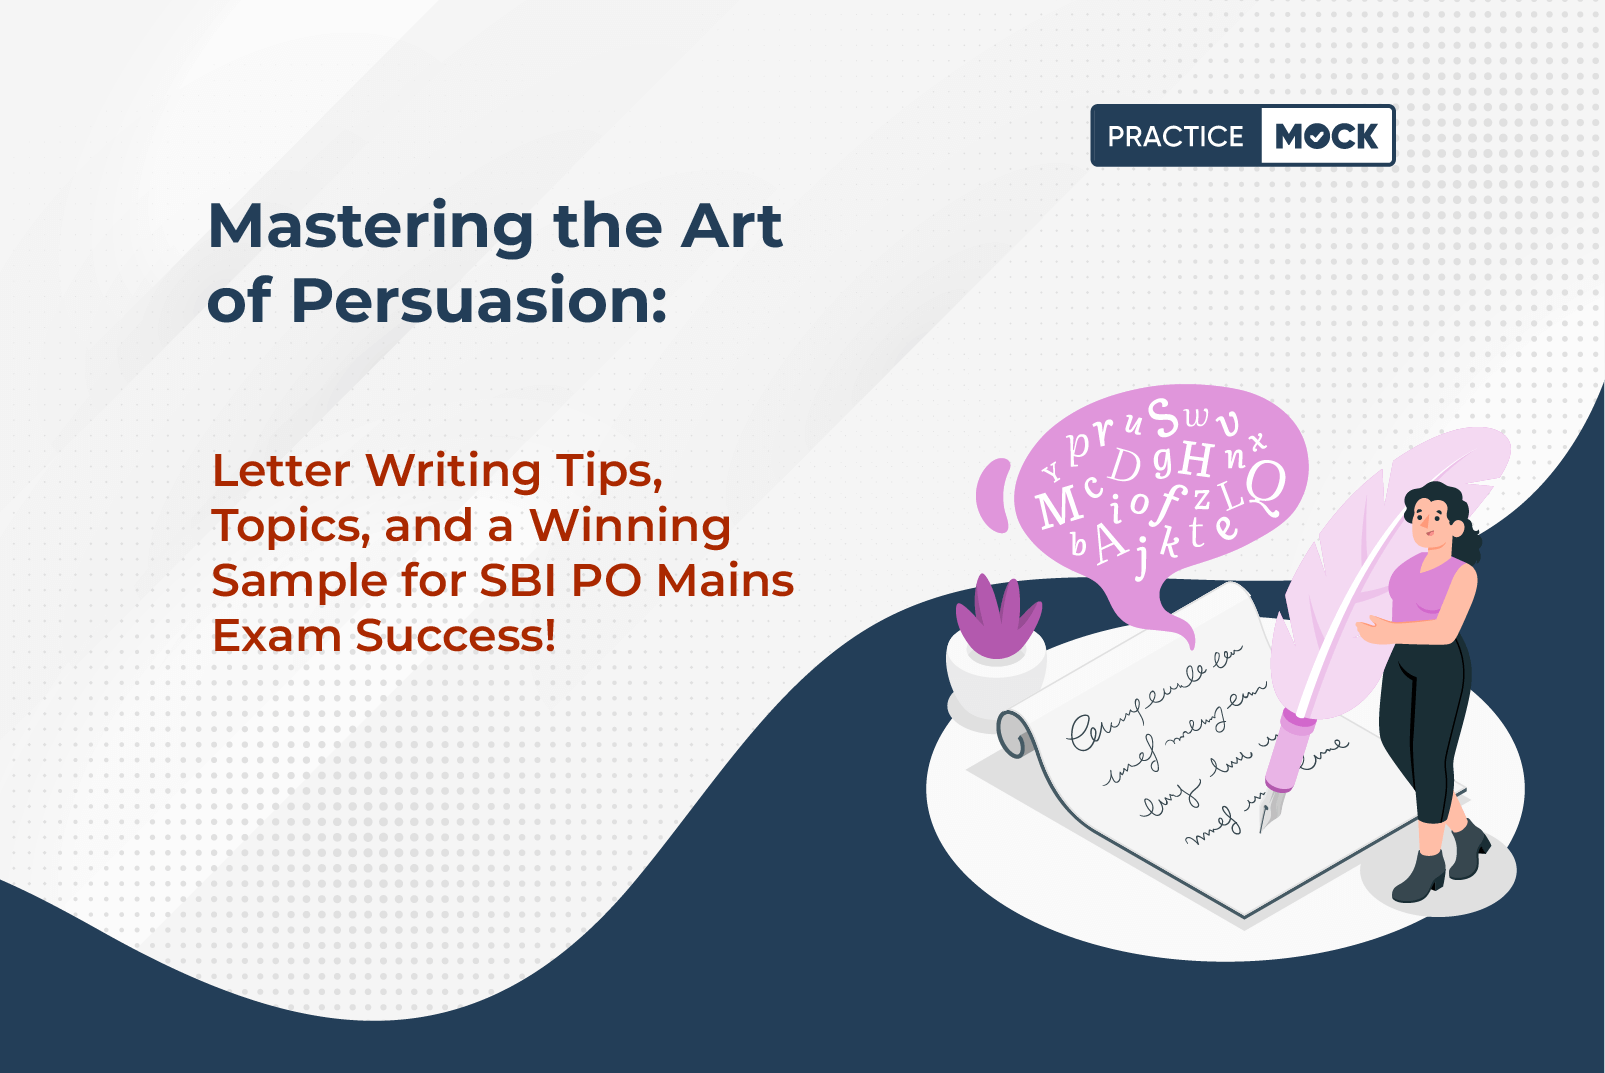 Mastering the Art of Persuasion Letter Writing Tips, Topics, and a Winning Sample for SBI PO Mains Exam Success! (1)